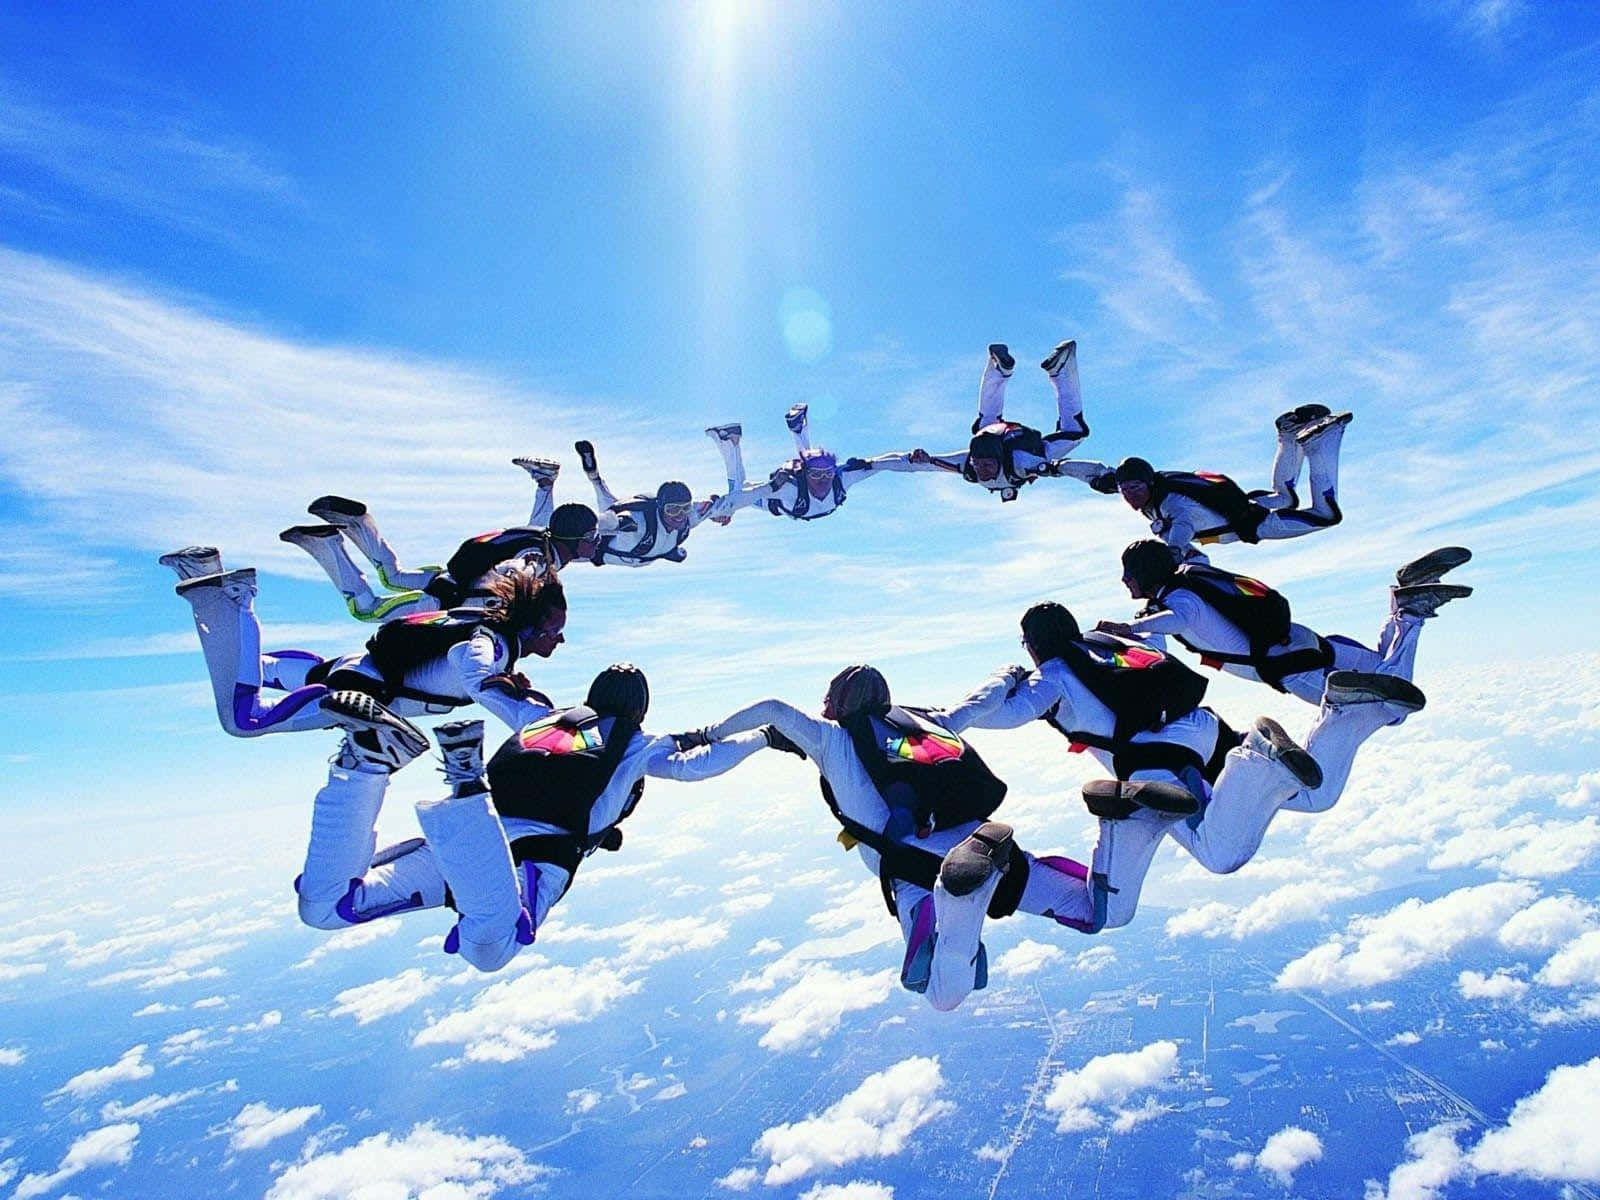 A Group Of People In The Air In A Circle